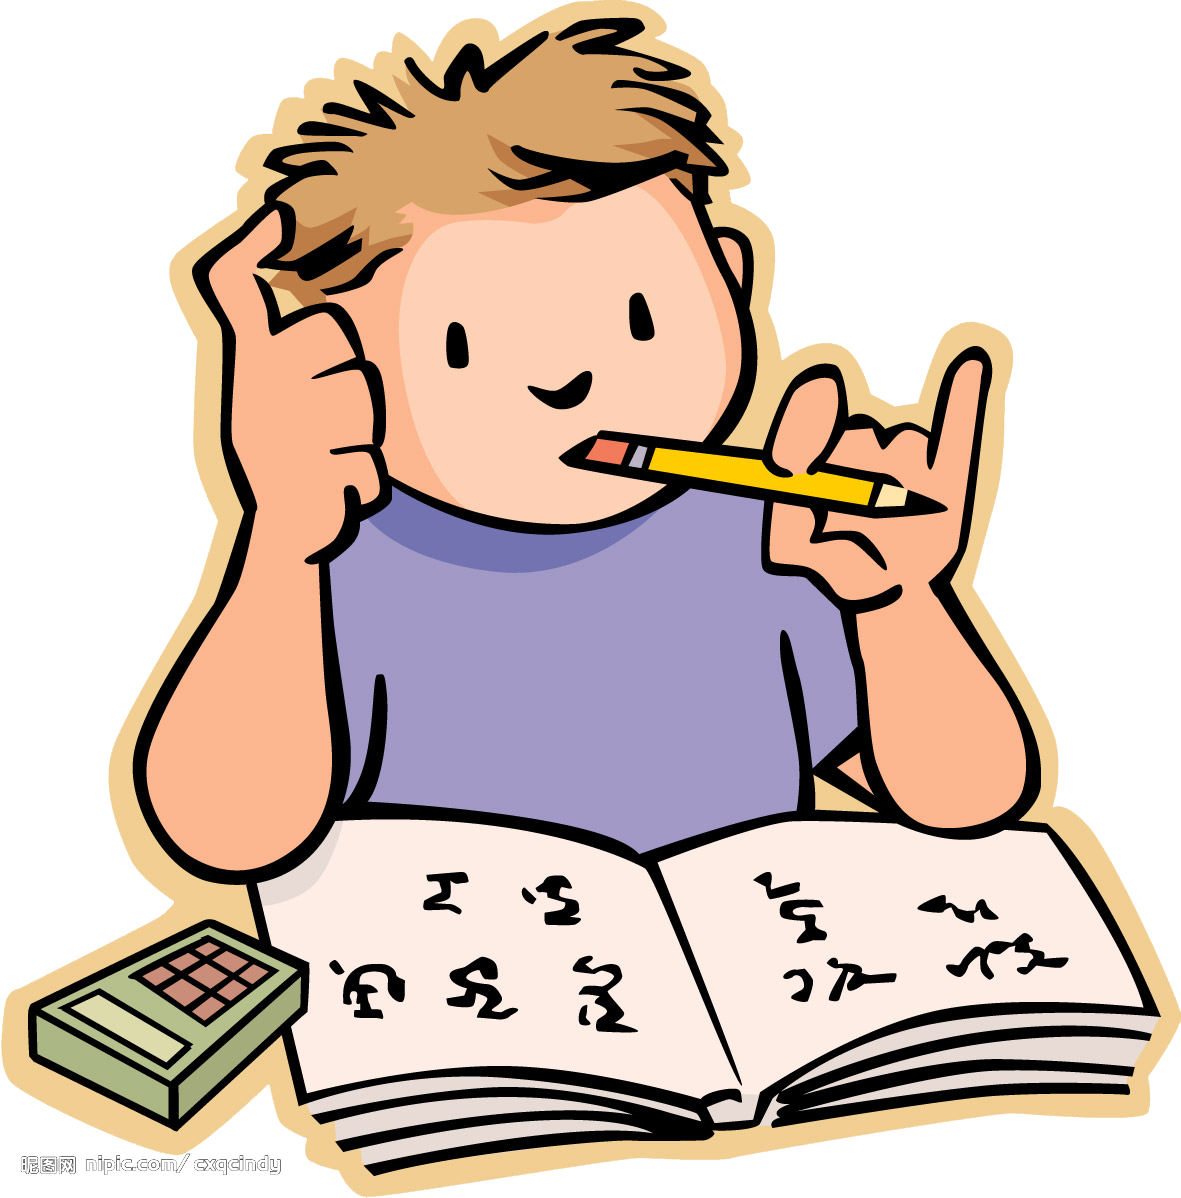 A Cartoon Of A Boy Holding A Pencil In His Mouth